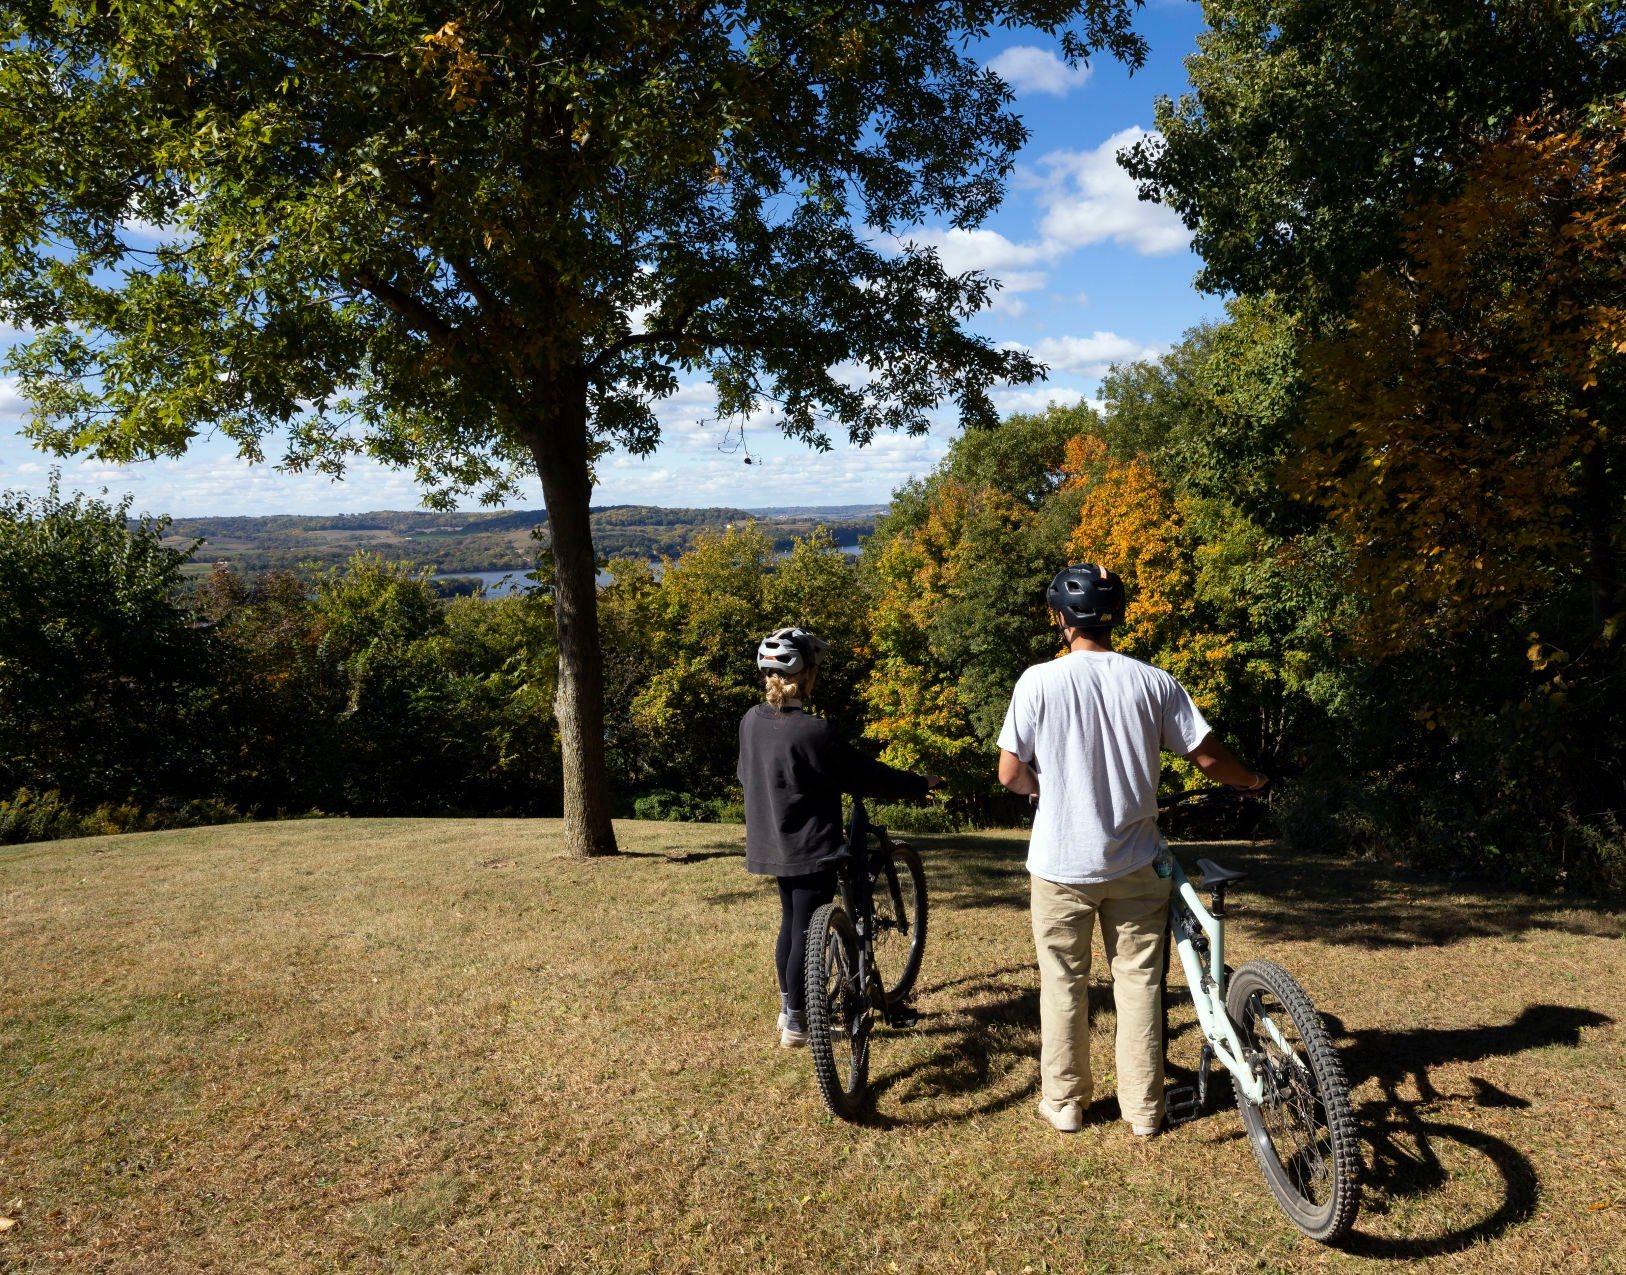 Quinten Bergles and Allison Mack at the start of one of the downhill trails at Farside Mountain Bike Park at Chestnut Mountain Resort in Galena, Ill., on Friday, Oct. 7, 2022.    PHOTO CREDIT: Stephen Gassman